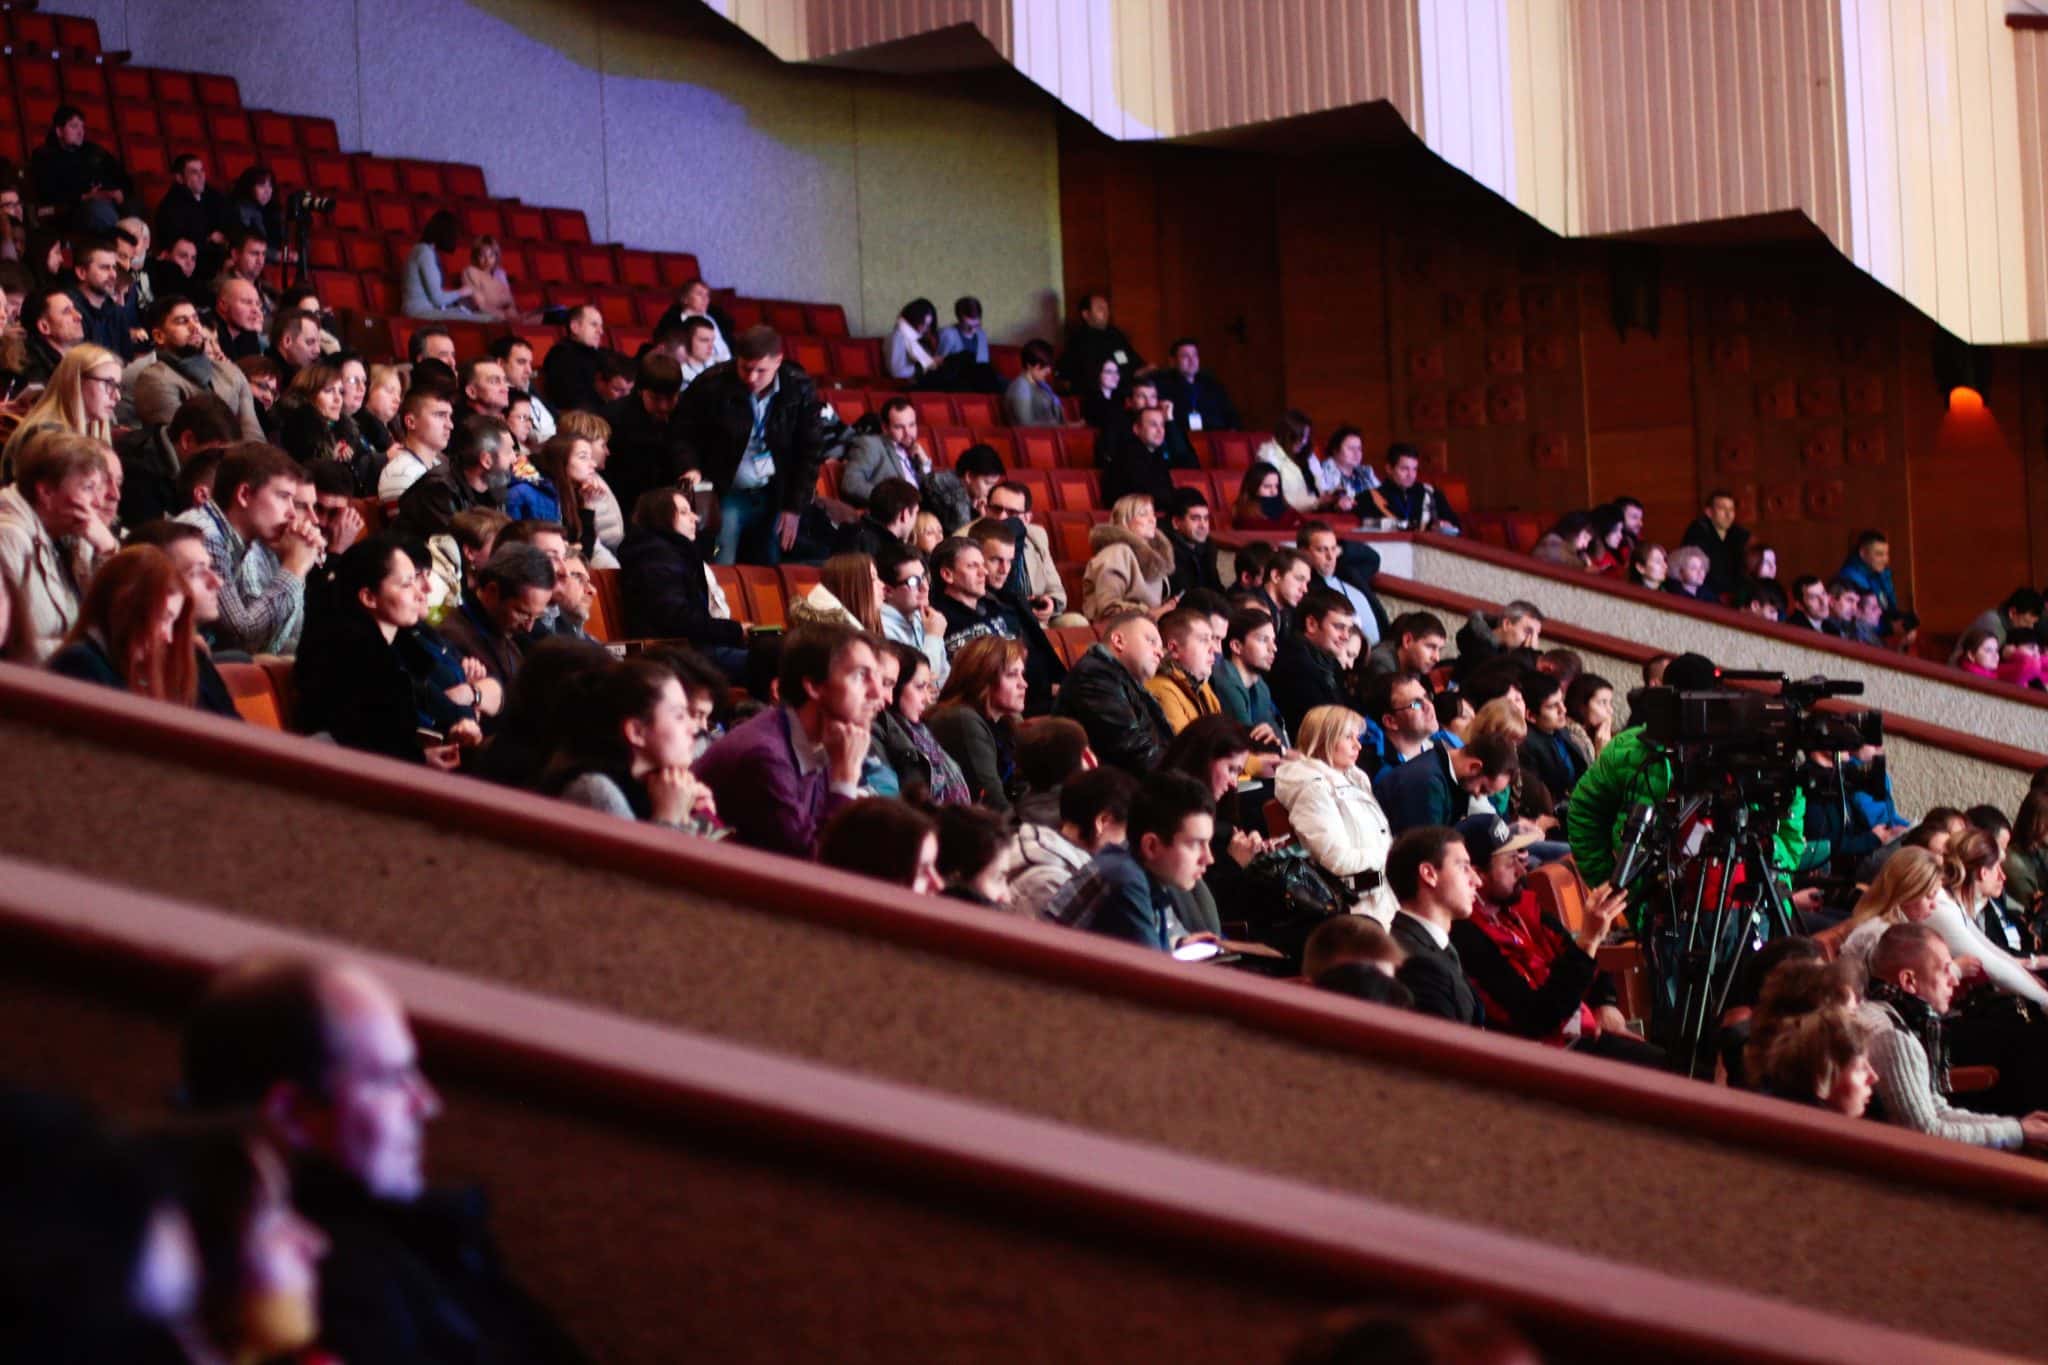 Group of people watching a performance in an auditorium.